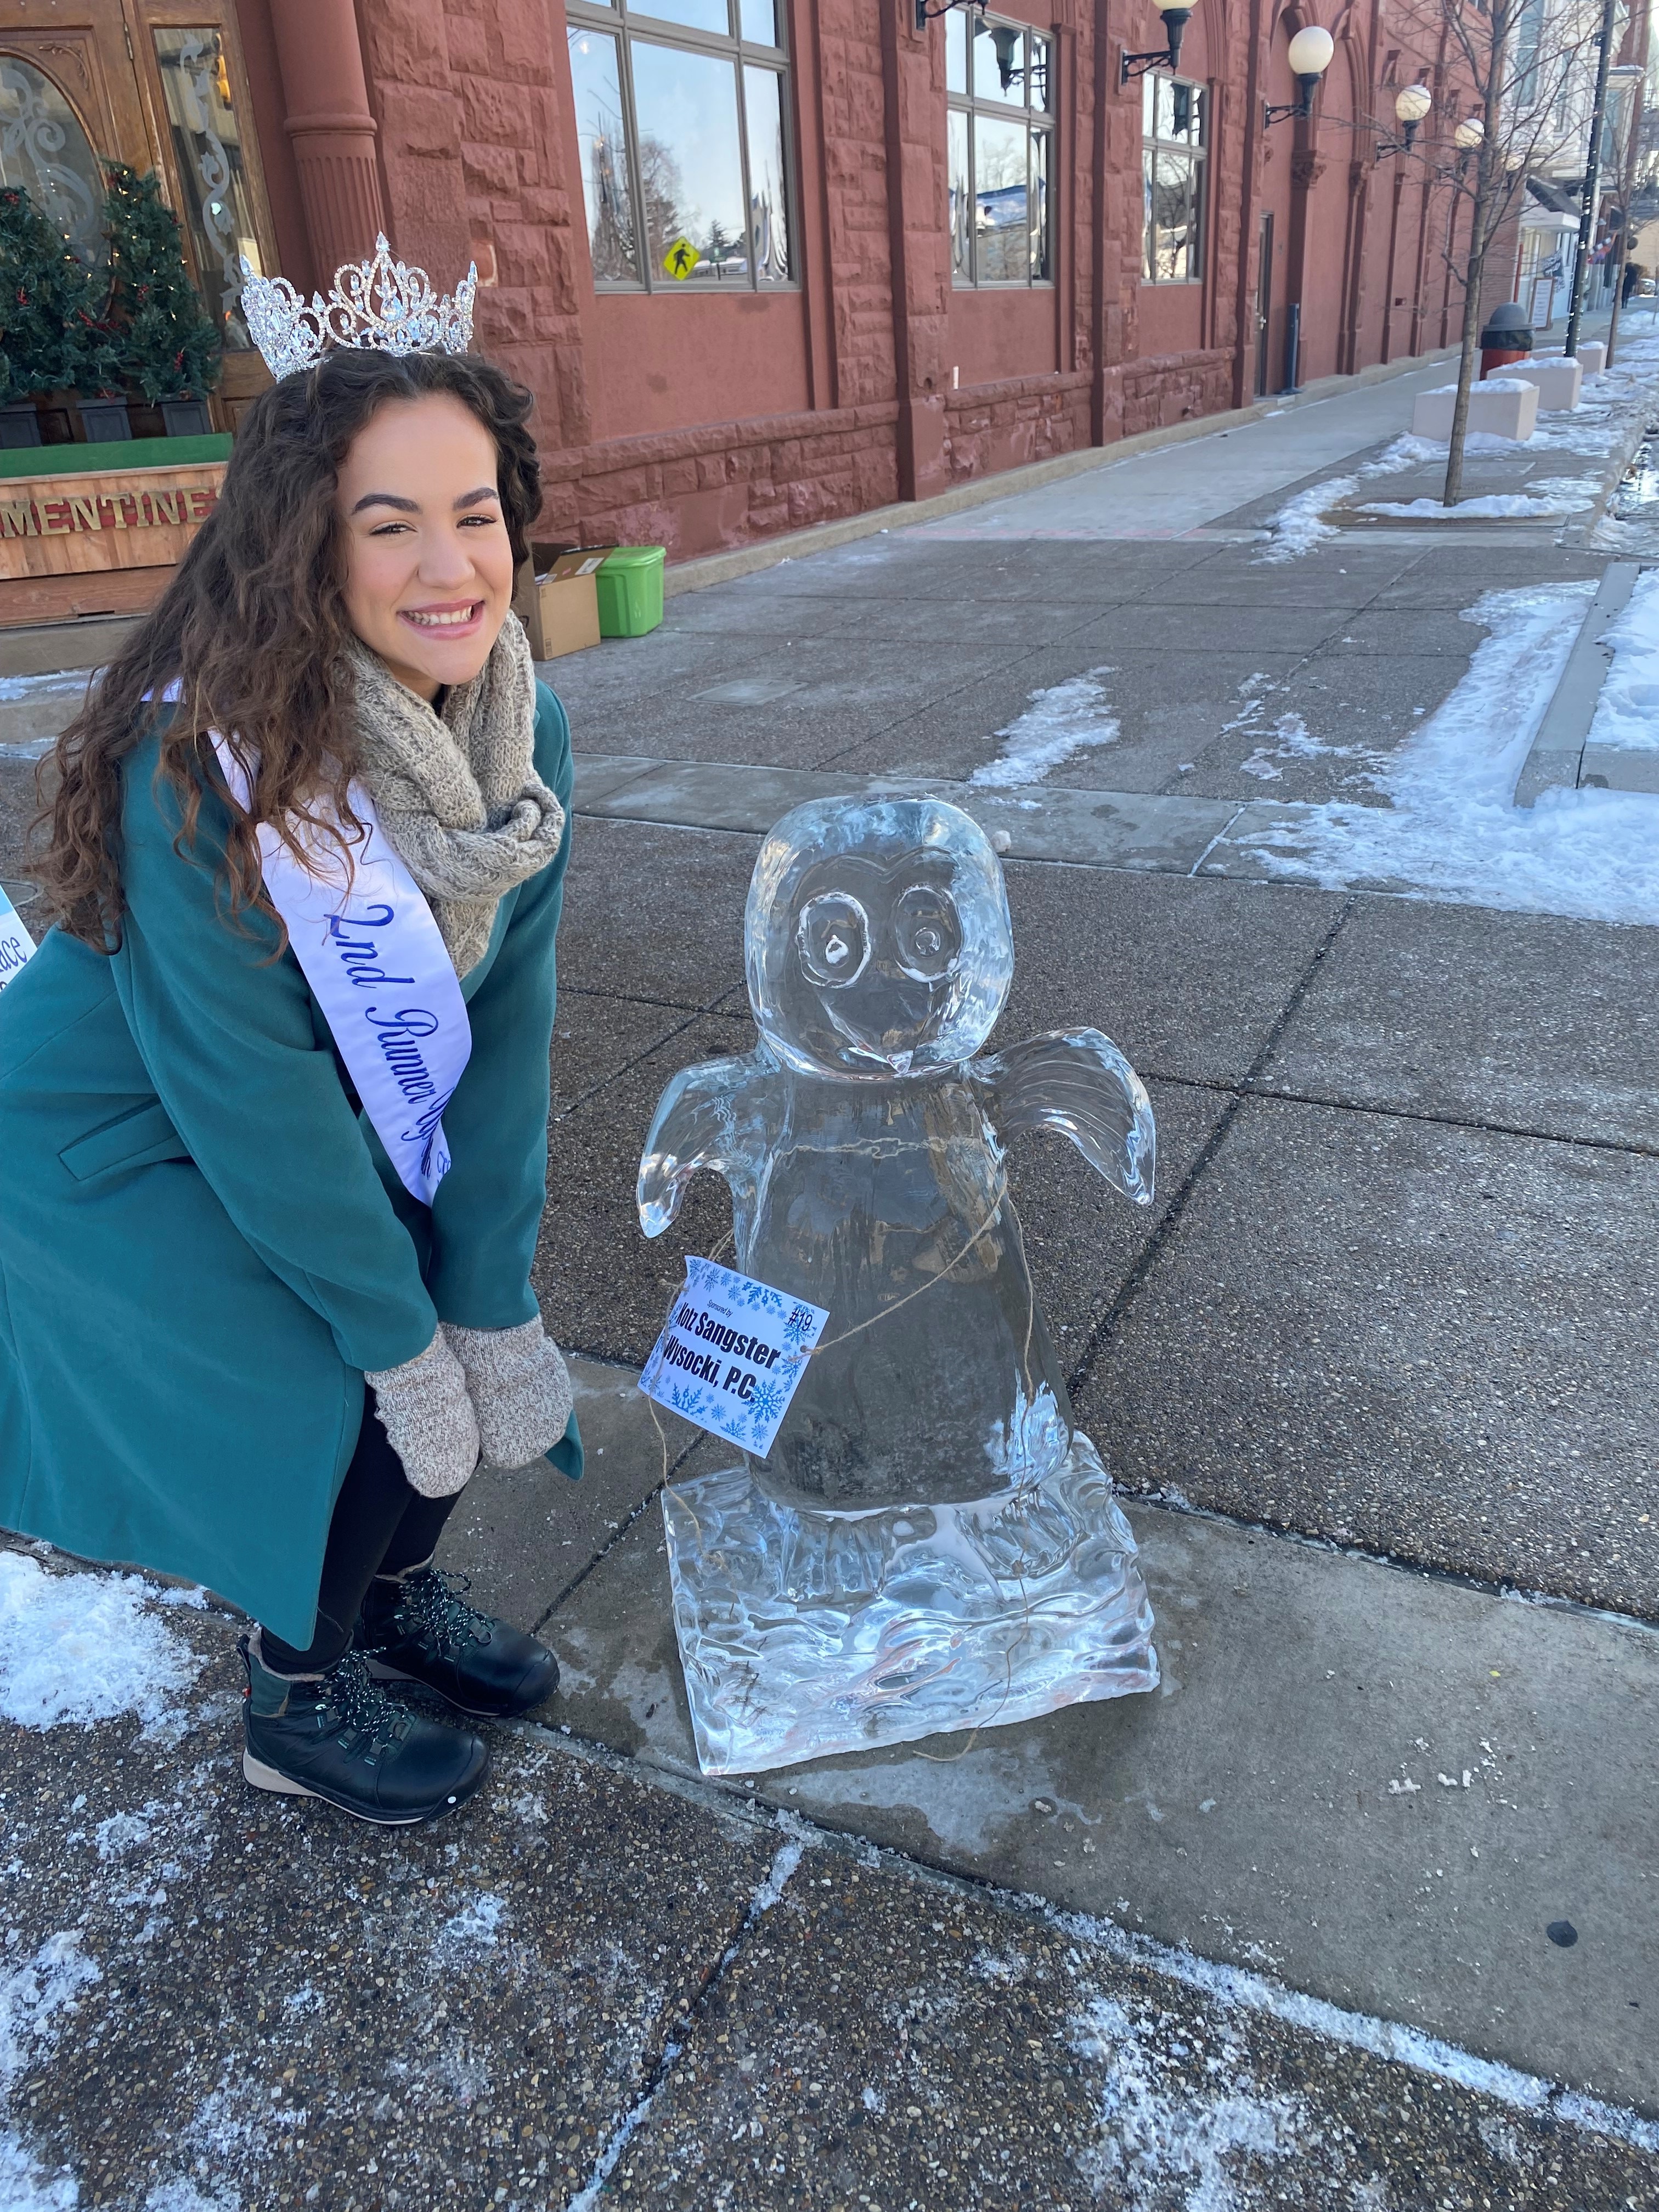 Miss South Haven pageant contestant Reese Garcia (daughter of KSW South Haven office employee) with the penguin ice sculpture Kotz Sangster sponsored.